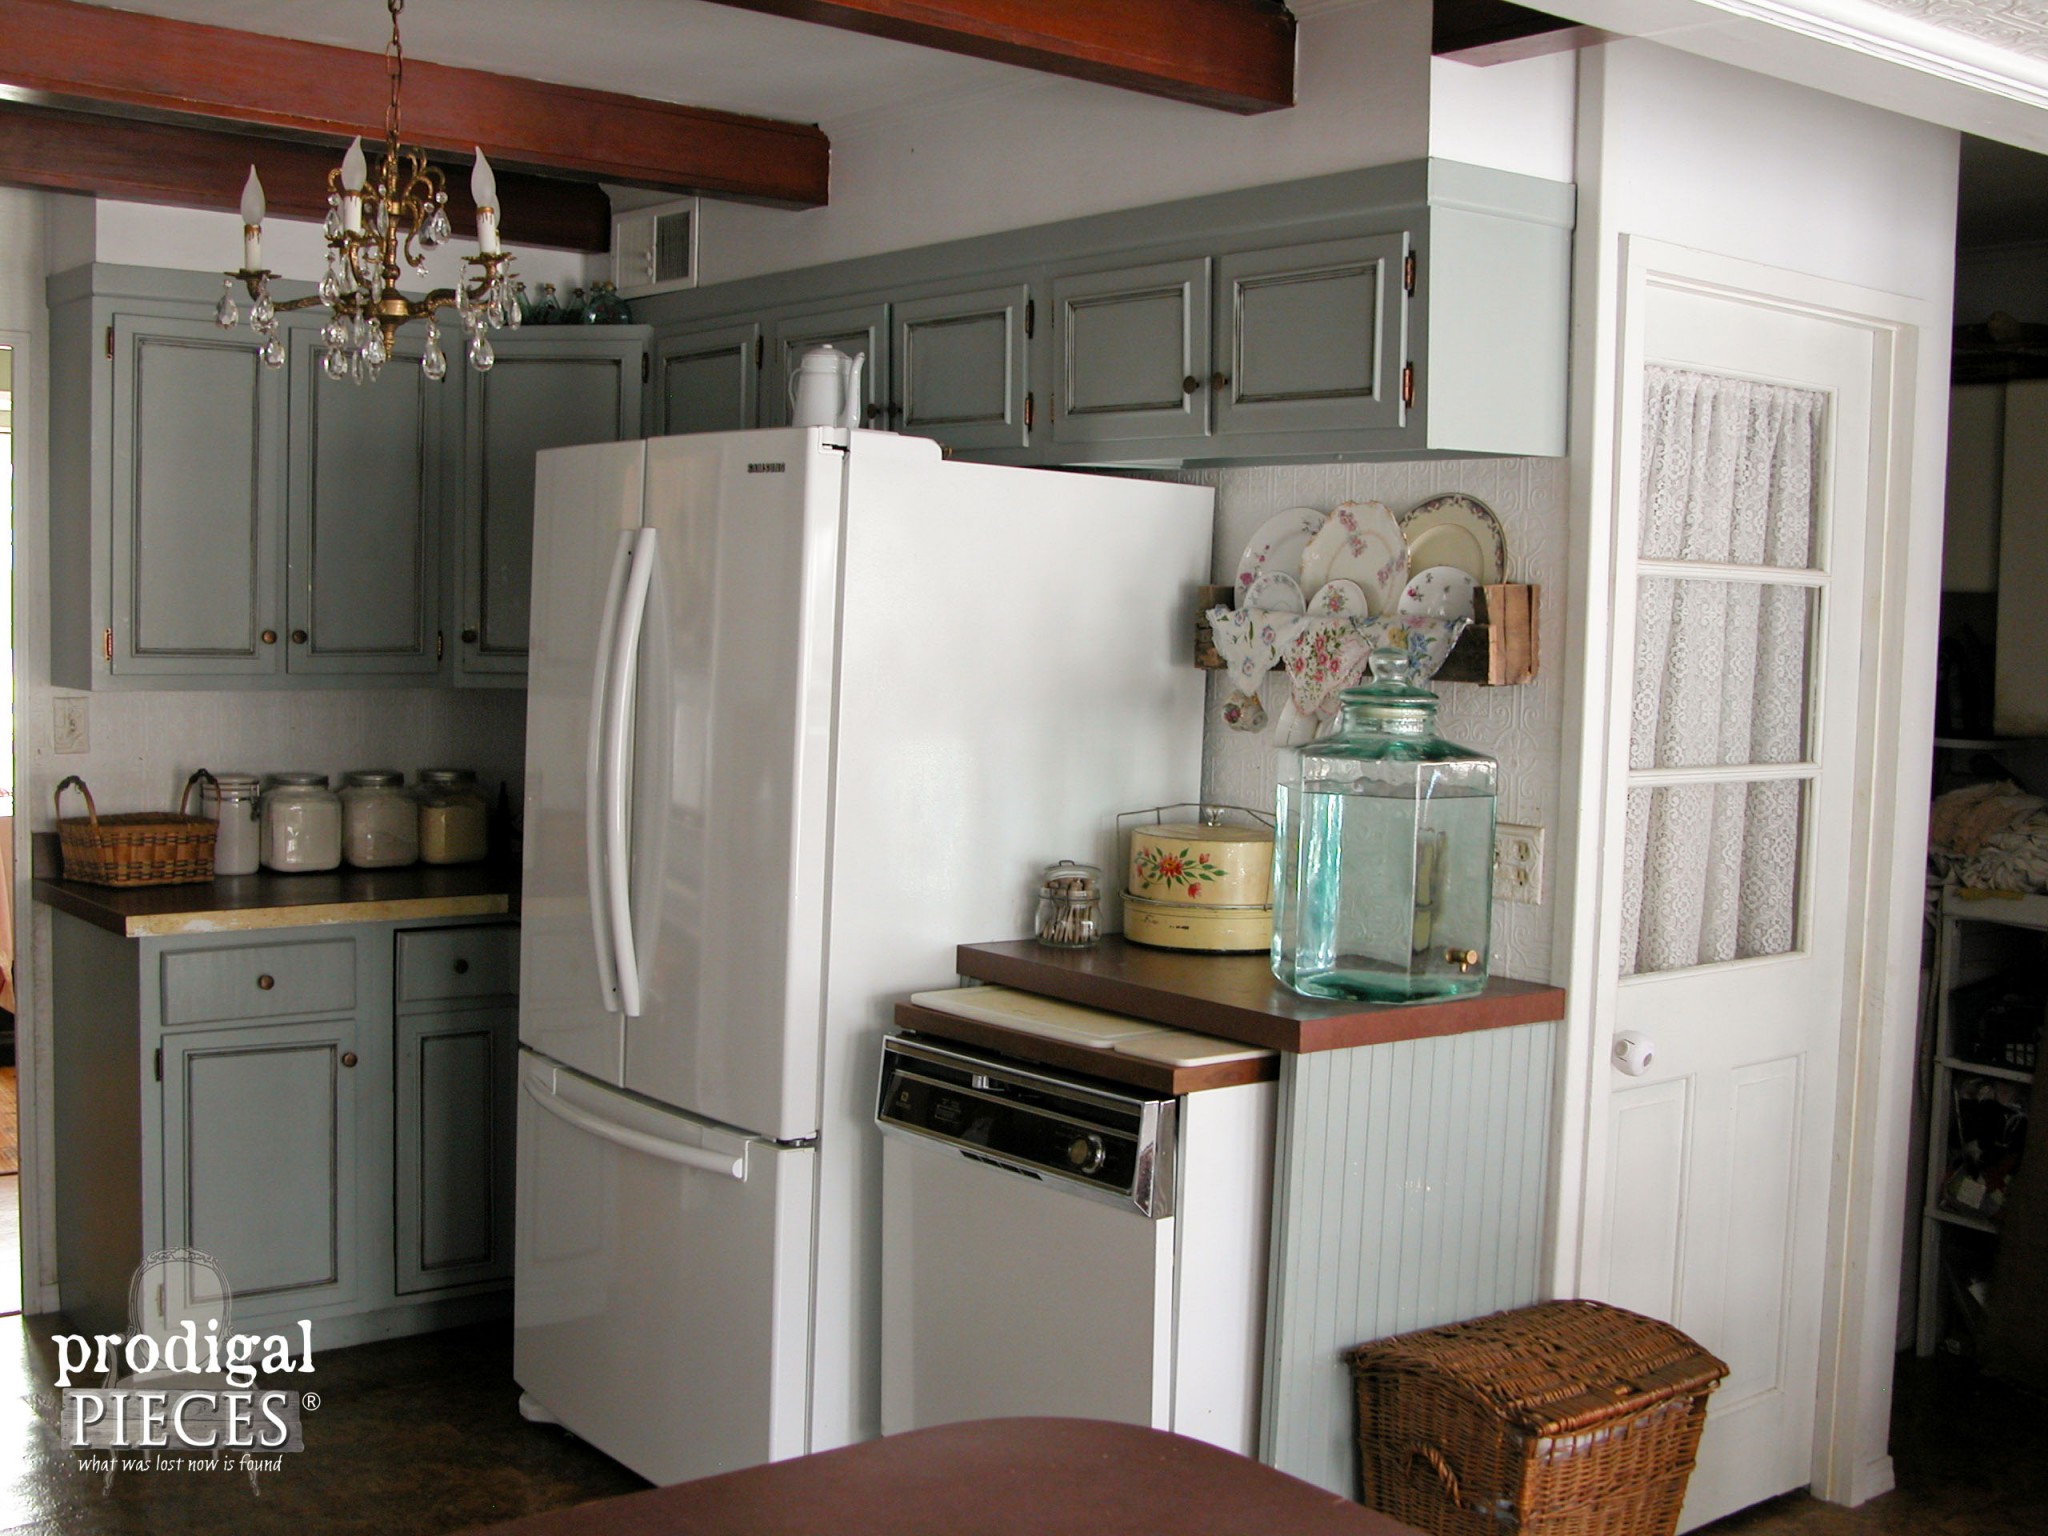 Blue Gray Cabinets in Kitchen Remodel by Prodigal Pieces | www.prodigalpieces.com